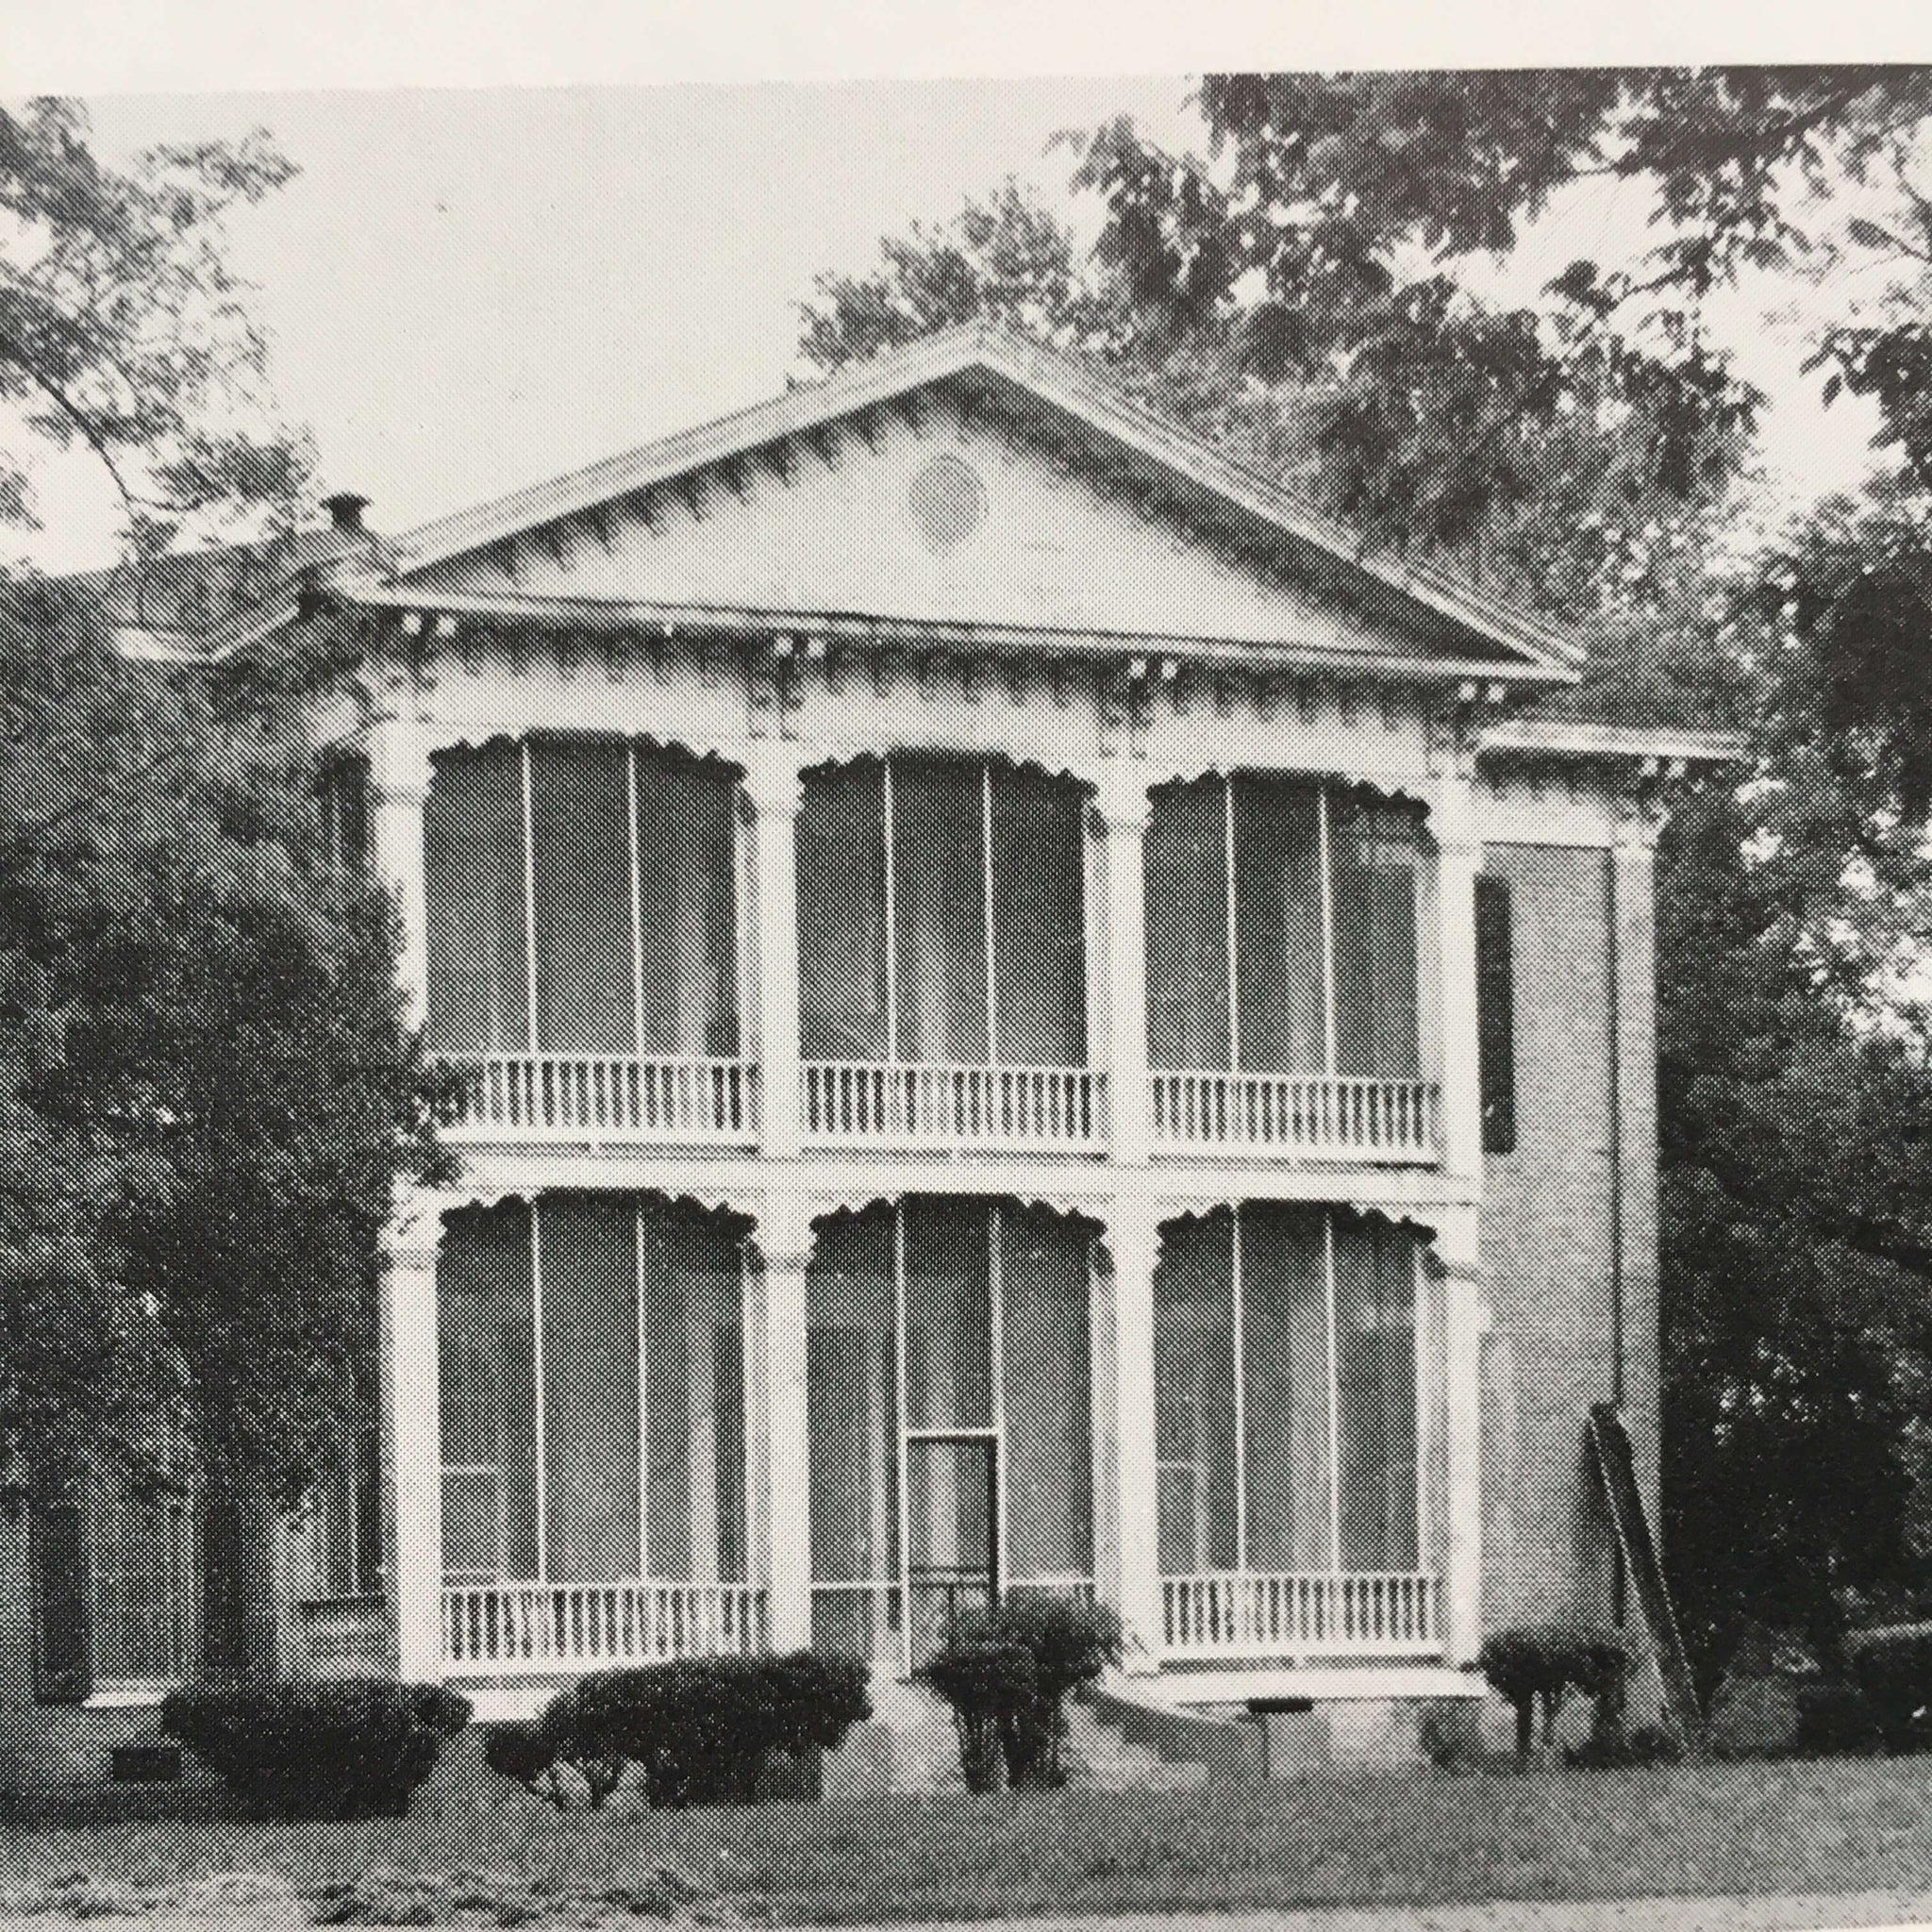 Historic Architecture in Mississippi - Mary Wallace Crocker - 1974 Edition, Second Printing